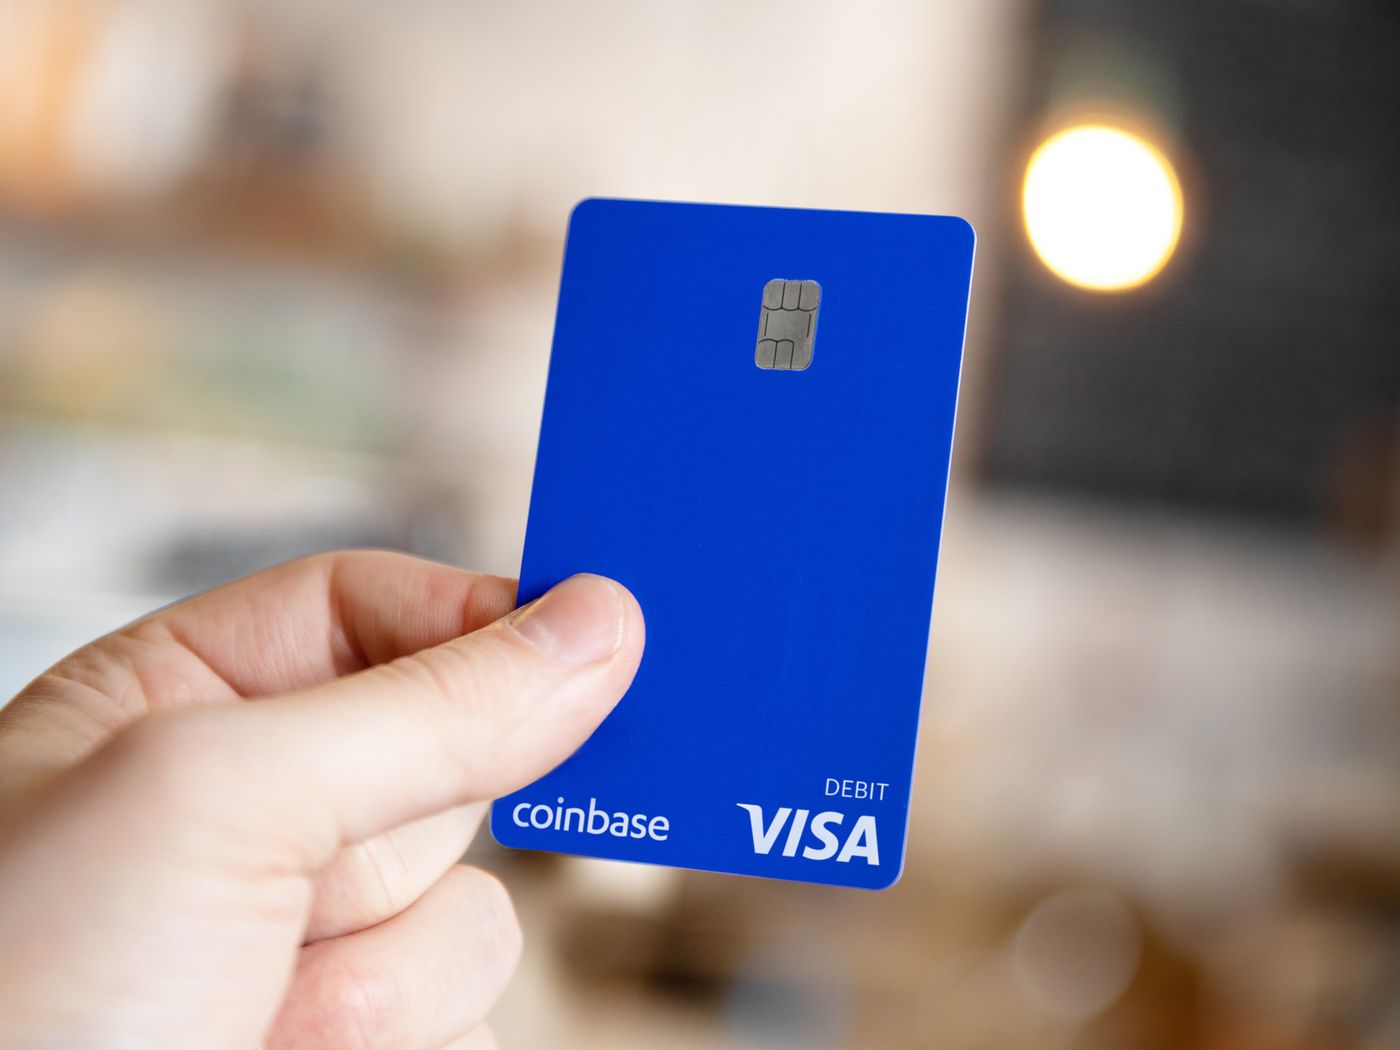 Here's What To Know About The Coinbase Debit Card